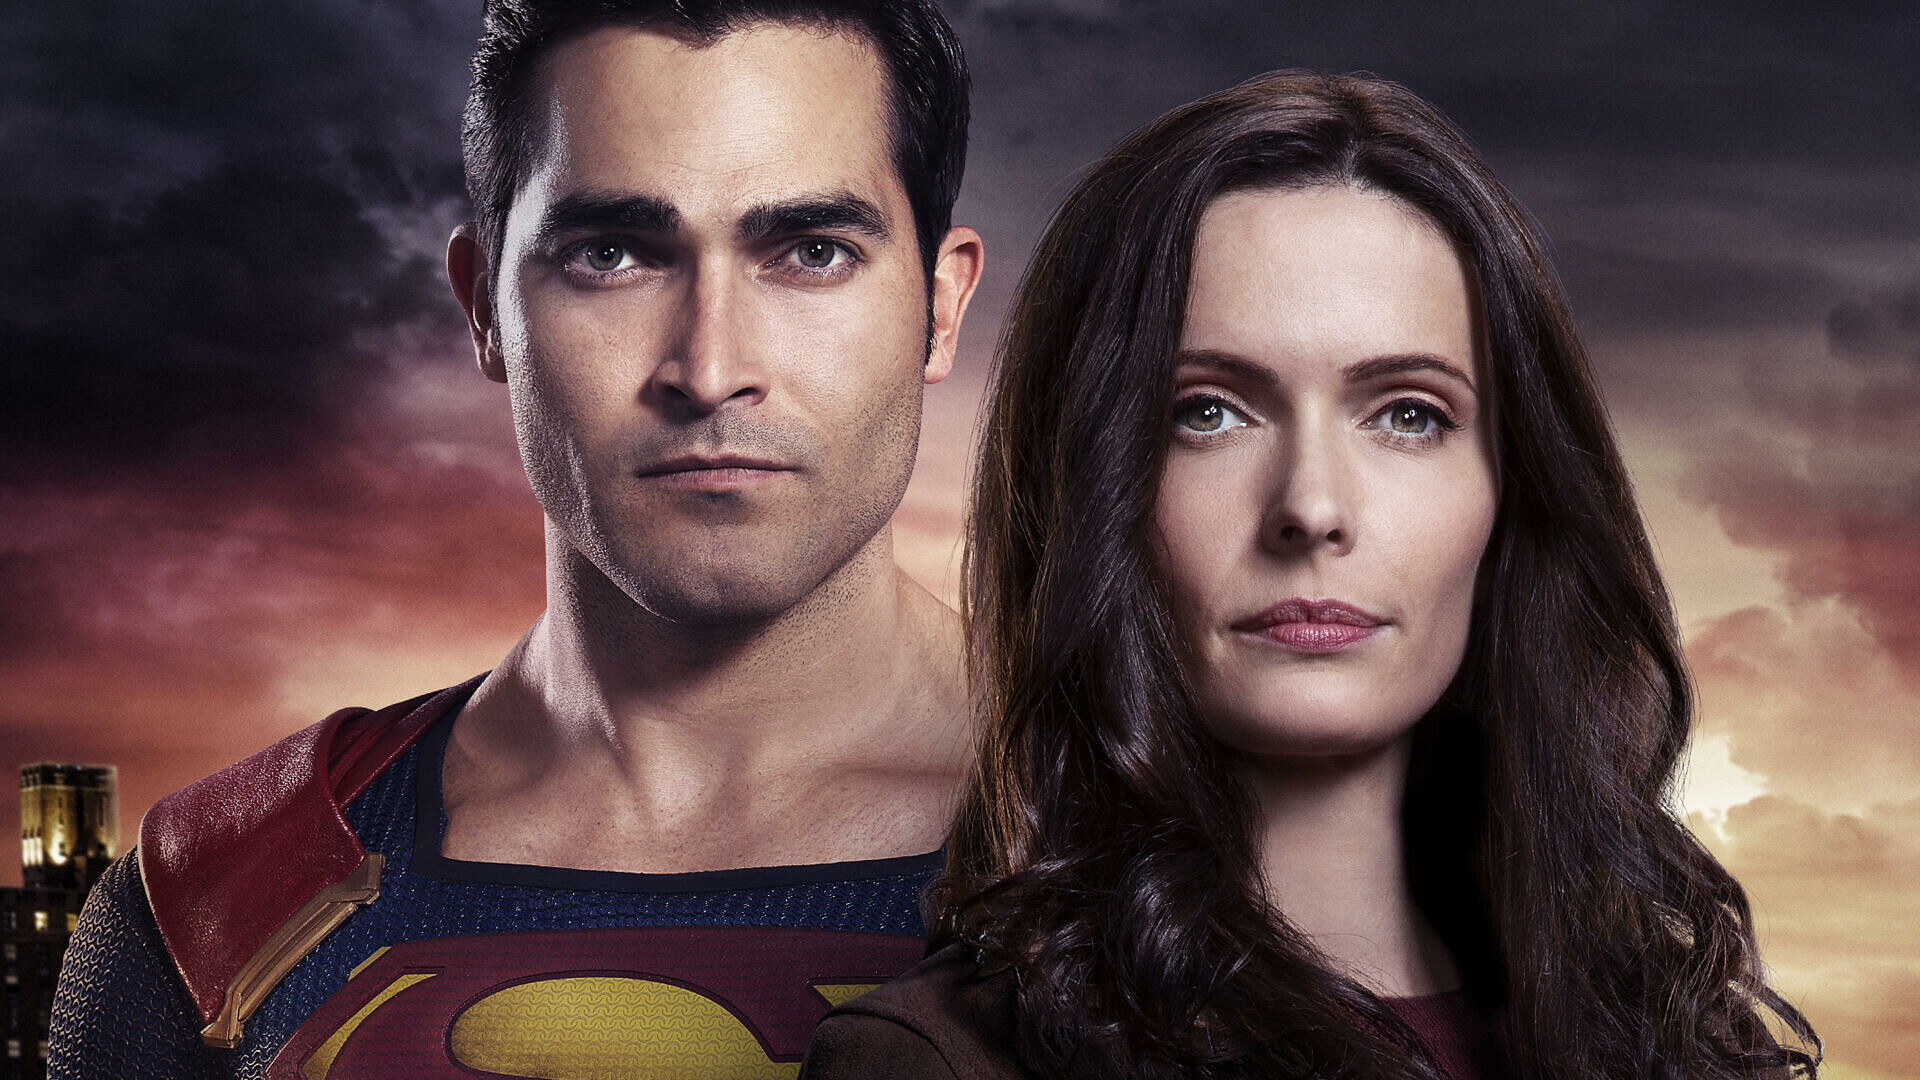 Superman and Lois (TV Series): A live-action television series that premiered in February 2021 on The CW. 1920x1080 Full HD Wallpaper.